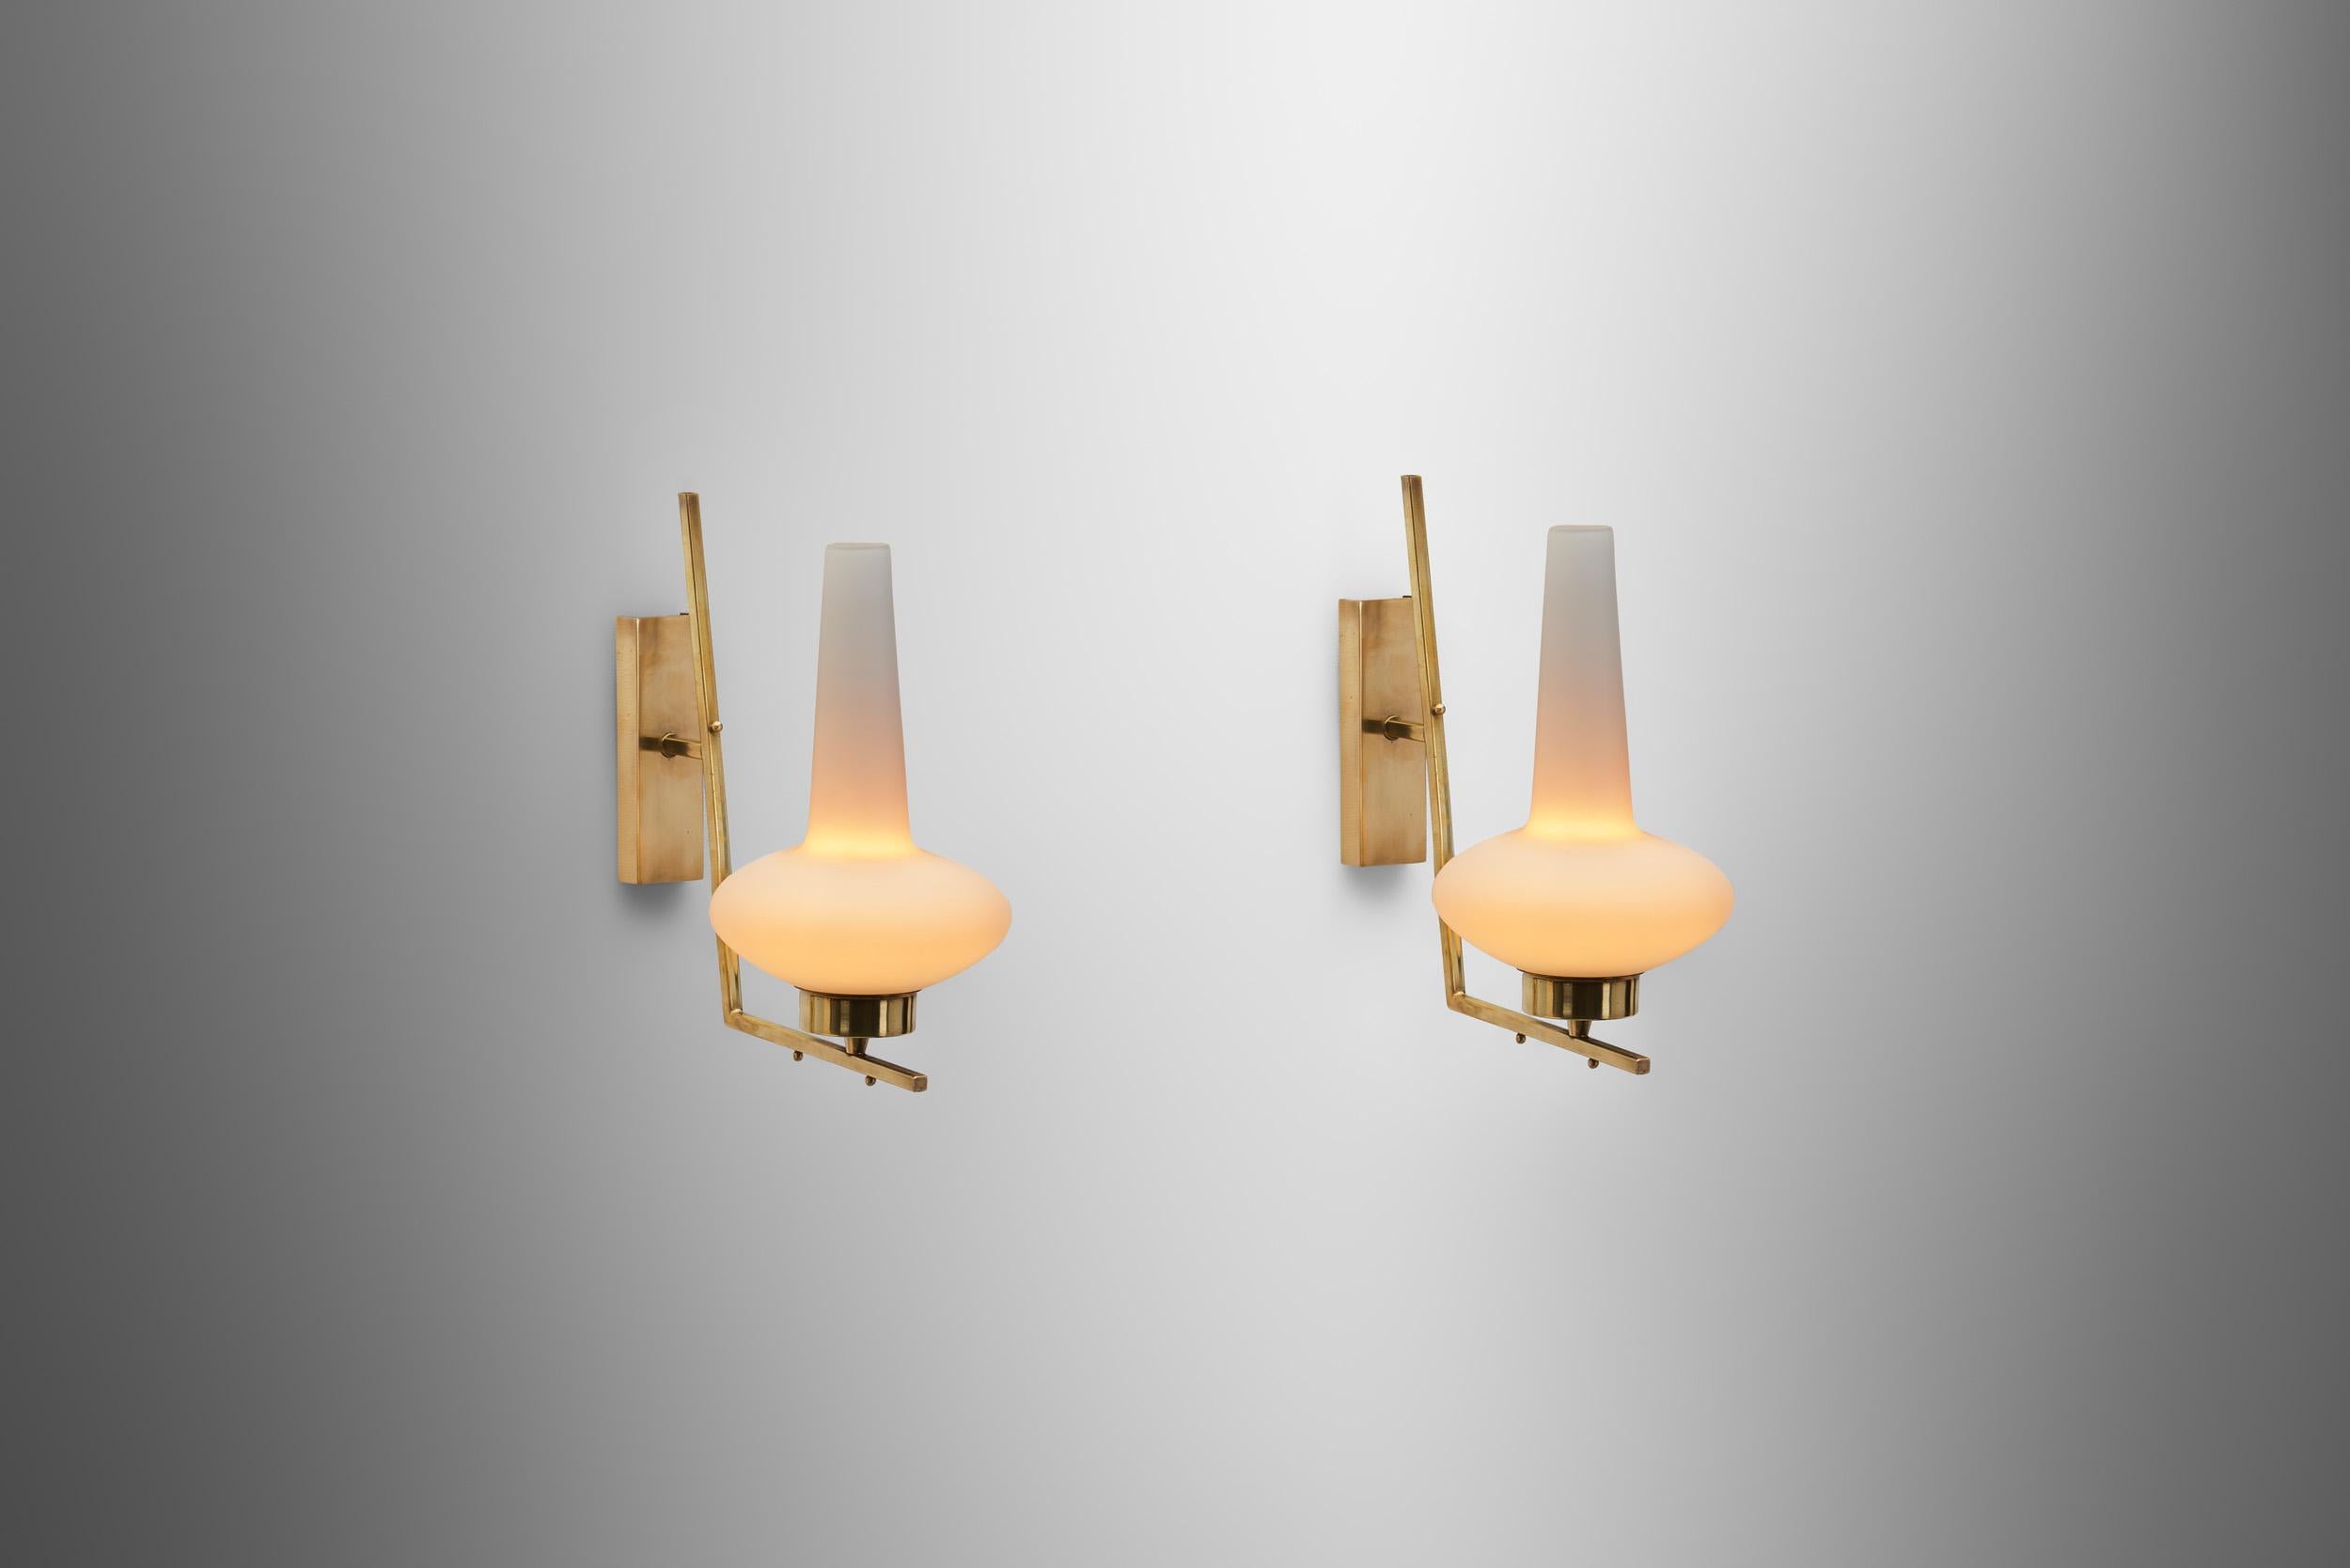 Mid-20th Century Italian Mid-Century Modern Brass Wall Lamps, Italy, 1950s For Sale